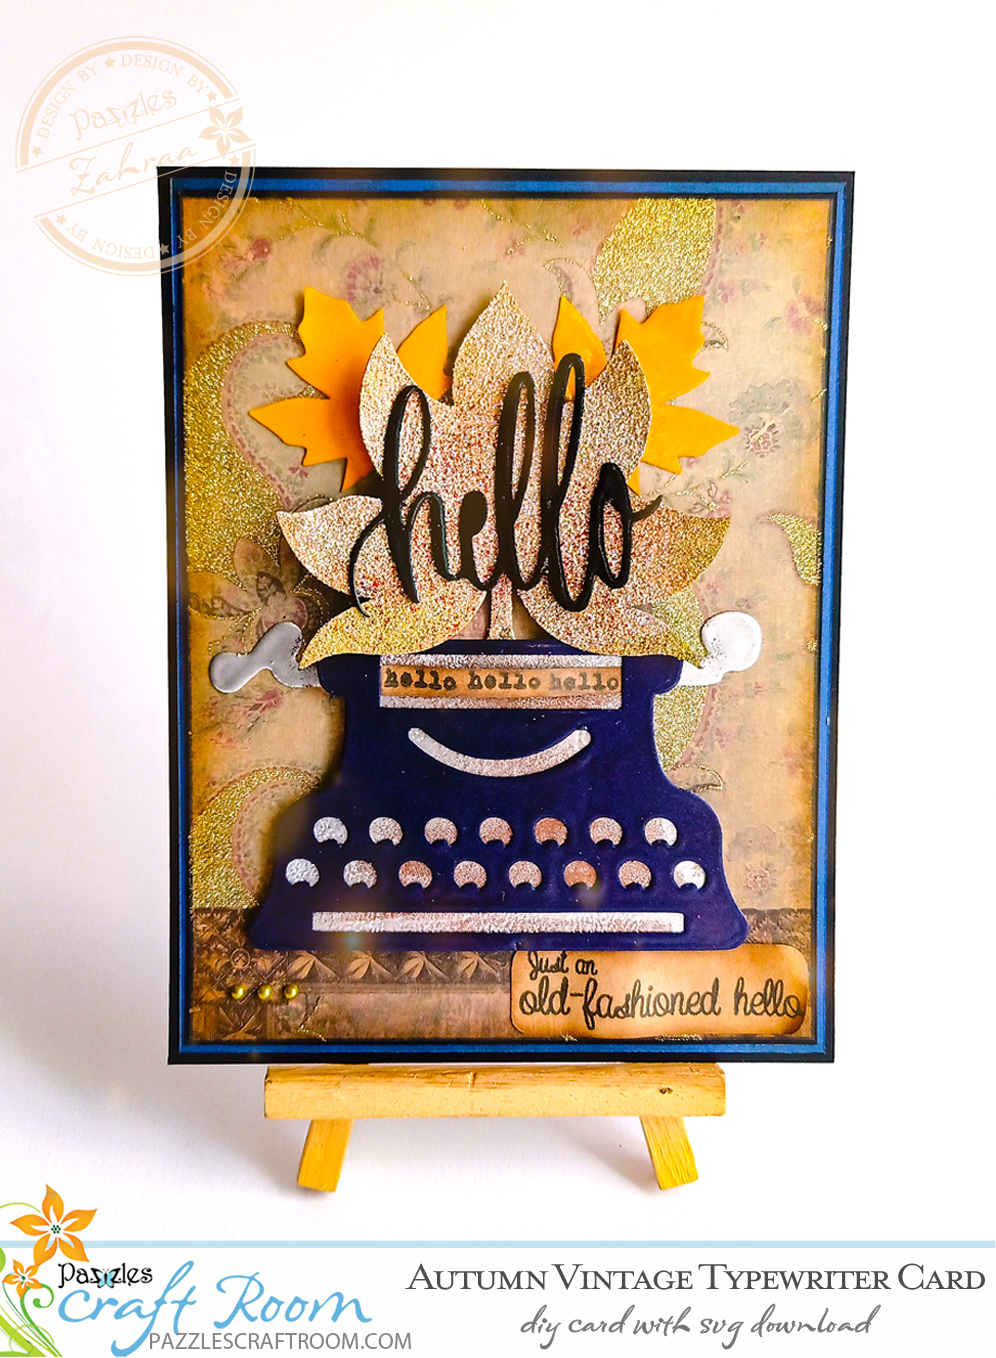 Pazzles DIY Autumn Vintage Typewriter Card with instant SVG download. Compatible with all major electronic cutters including Pazzles Inspiration, Cricut, and Silhouette Cameo. Design by Zahraa Darweesh.